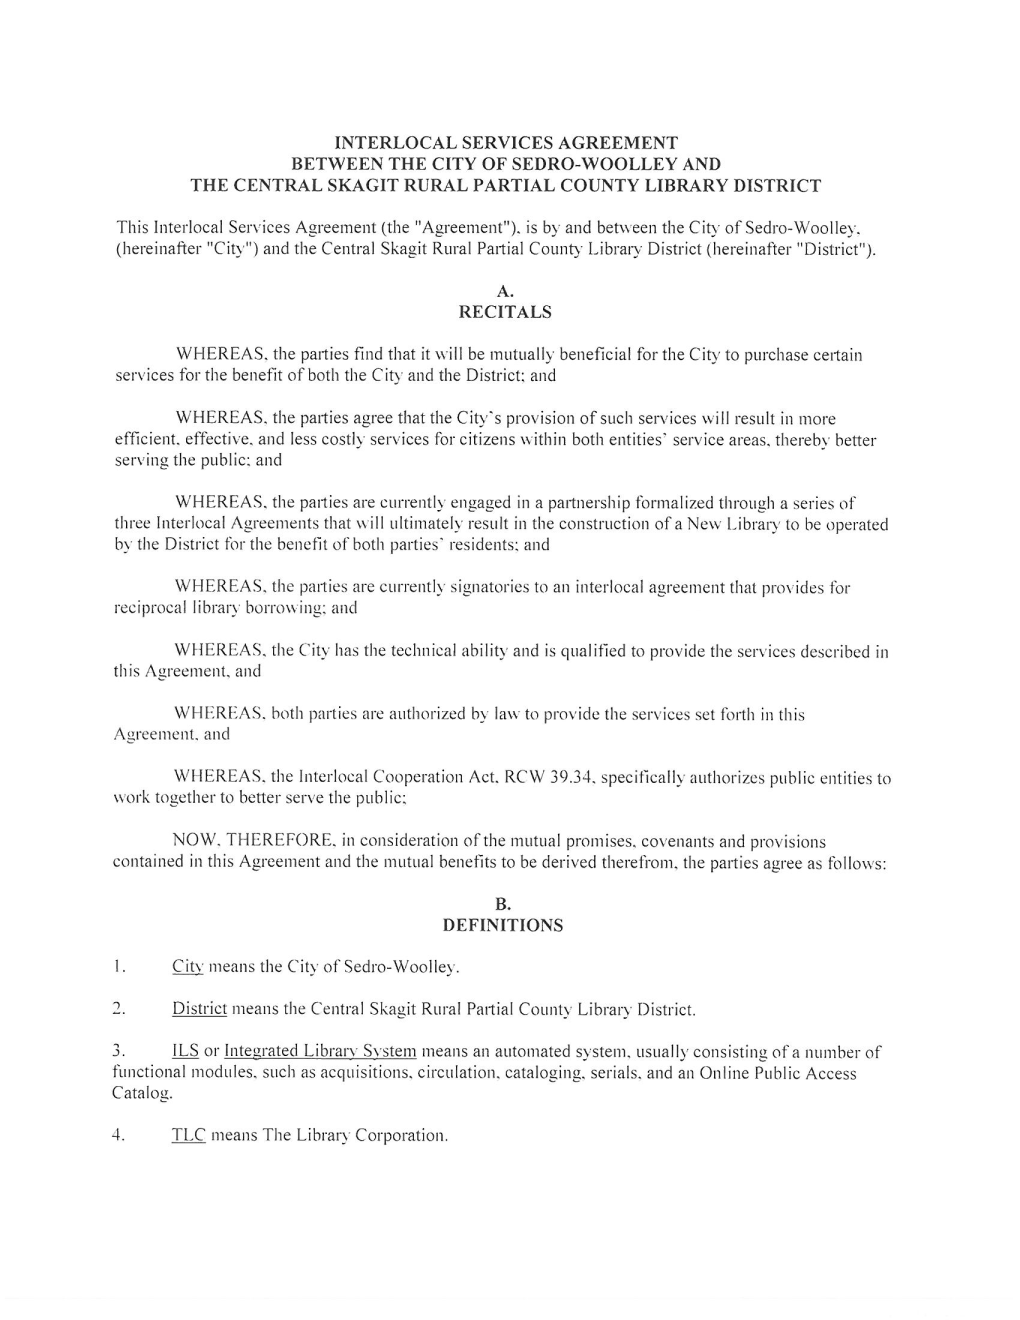 Interlocal Services Agreement Between the City of Sedro-Woolley and the Central Skagit Rural Partial County Library District